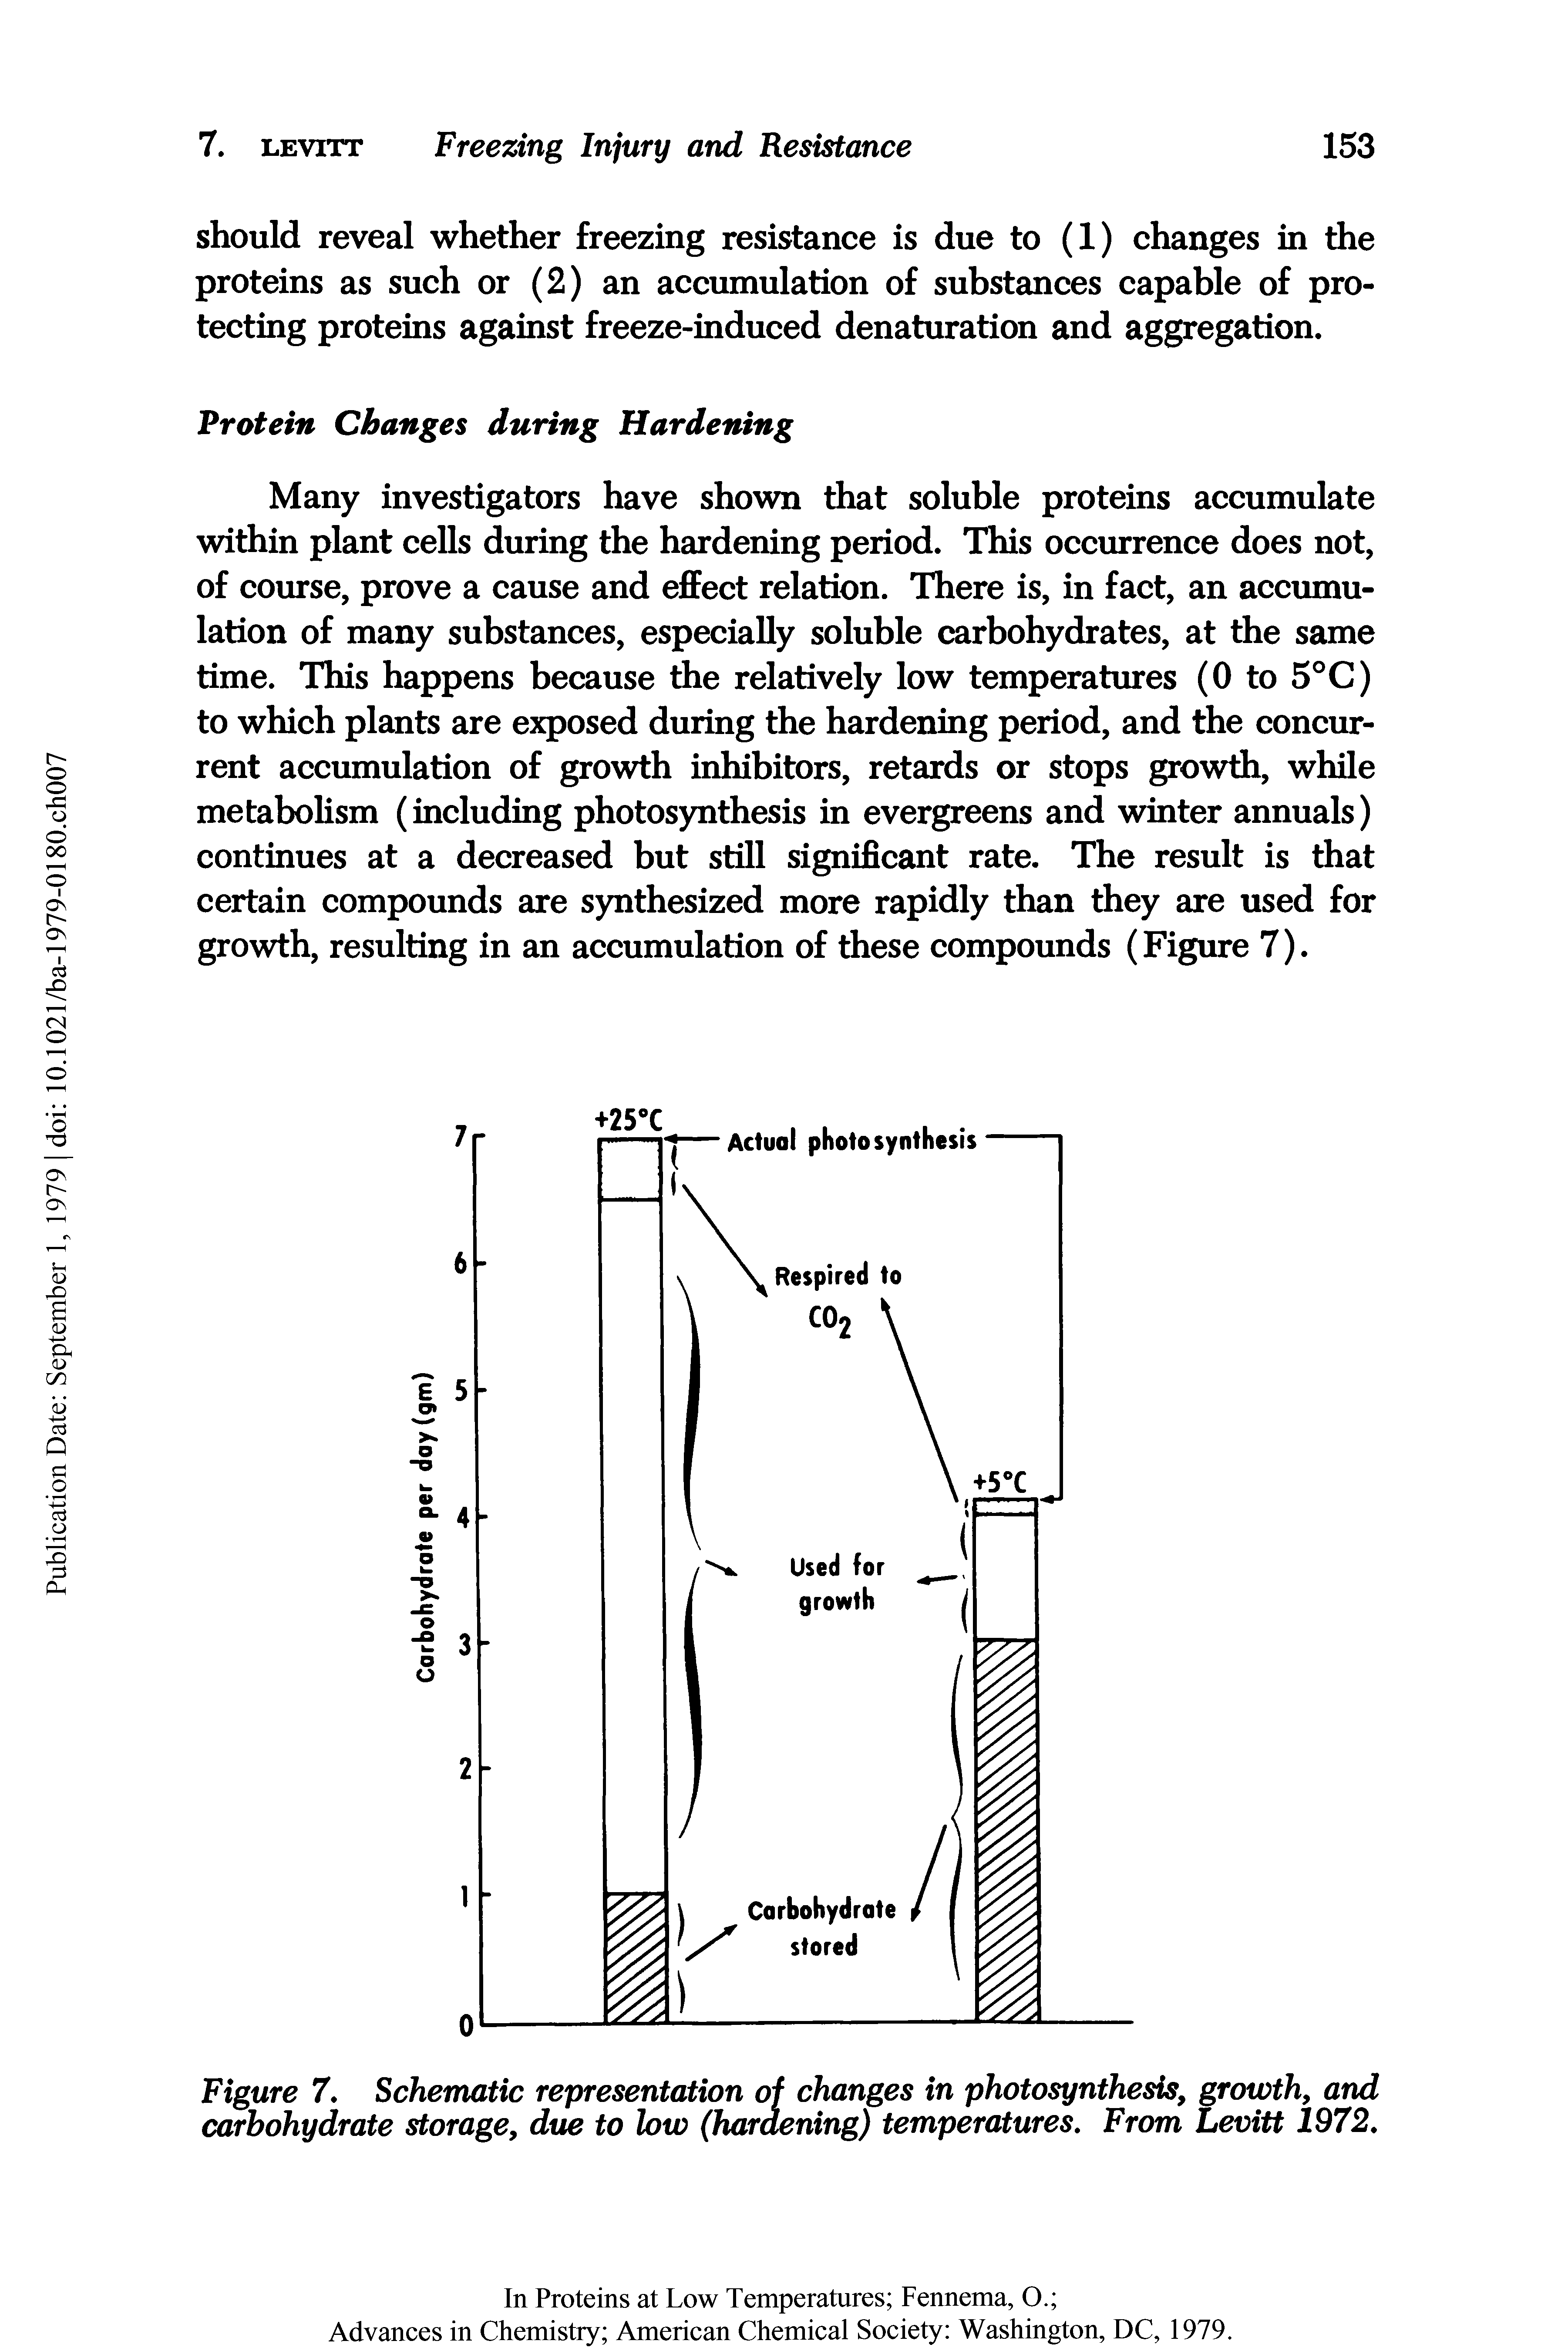 Figure 7. Schematic representation of changes in photosynthesis, growth, and carbohydrate storage, due to low (hardening) temperatures. From Levitt 1972.